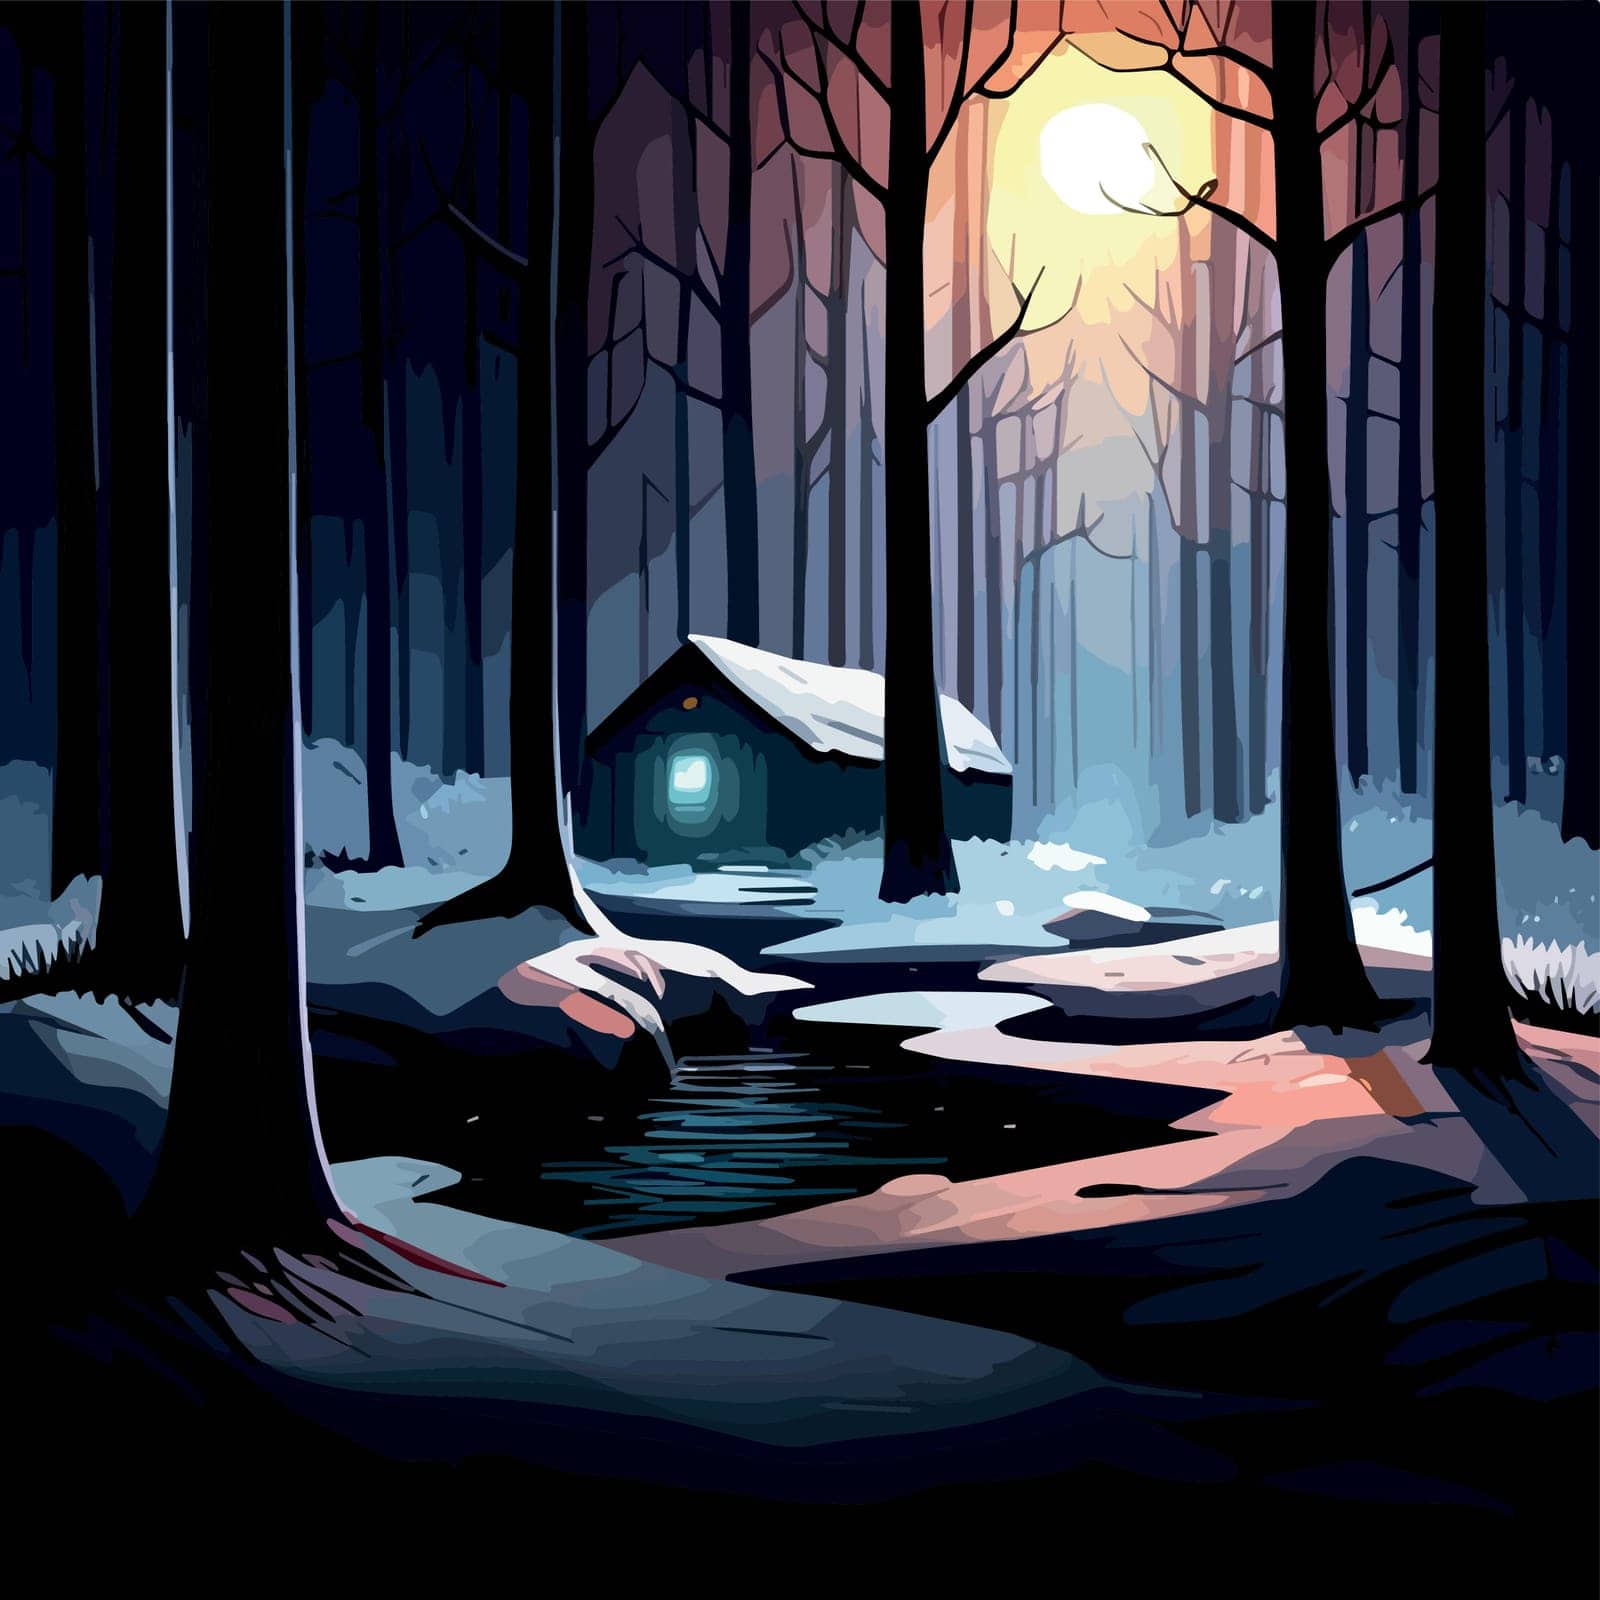 Landscape with moon moonlit night dark mysterious black forest and a home cottage house in winter, vector illustration